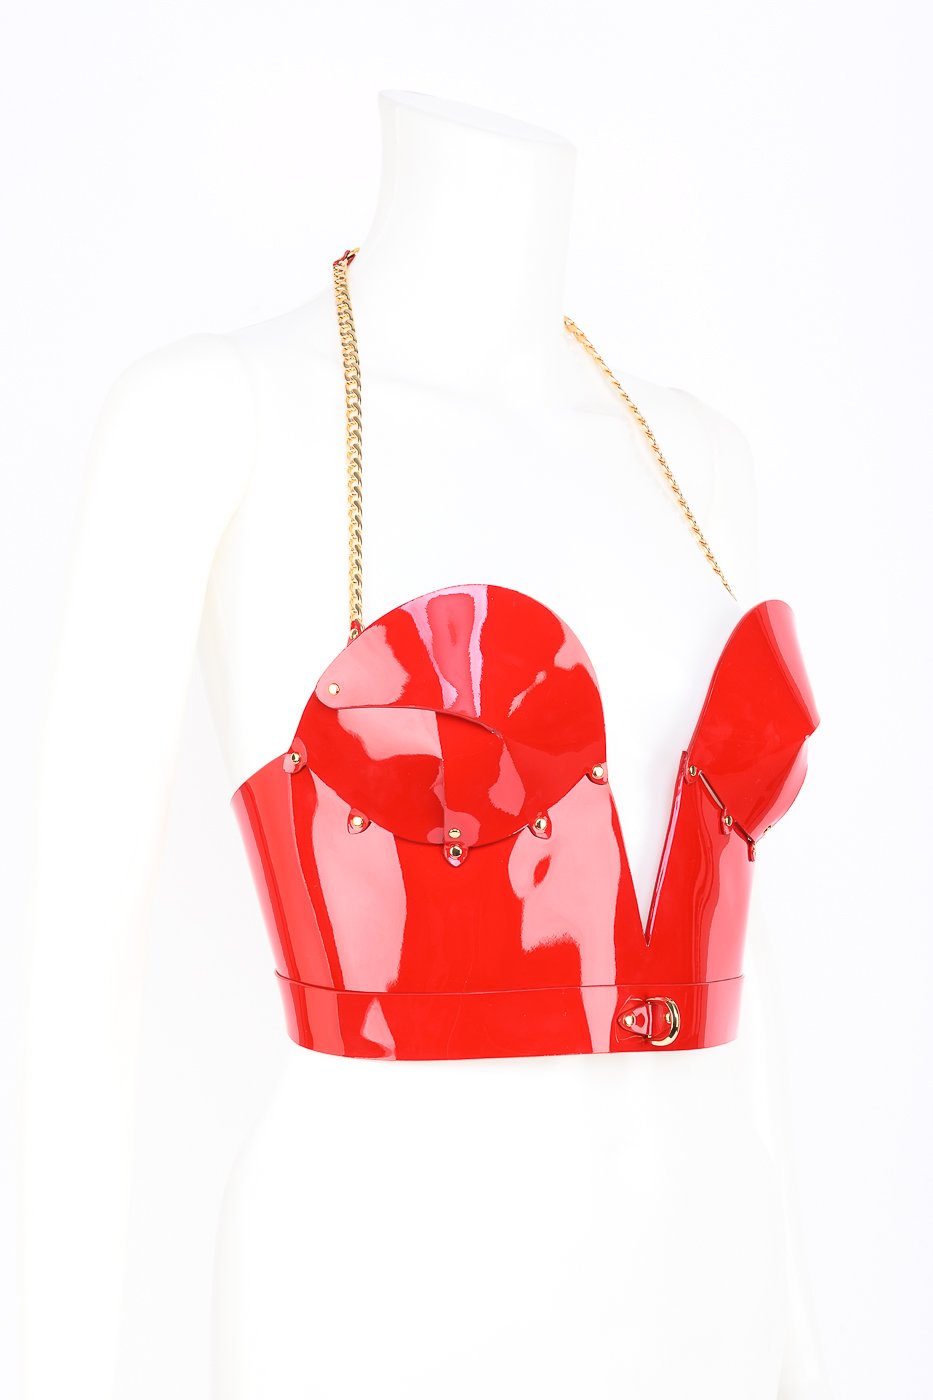 Roja Molded Corset in red patent leather by Fraulein Kink